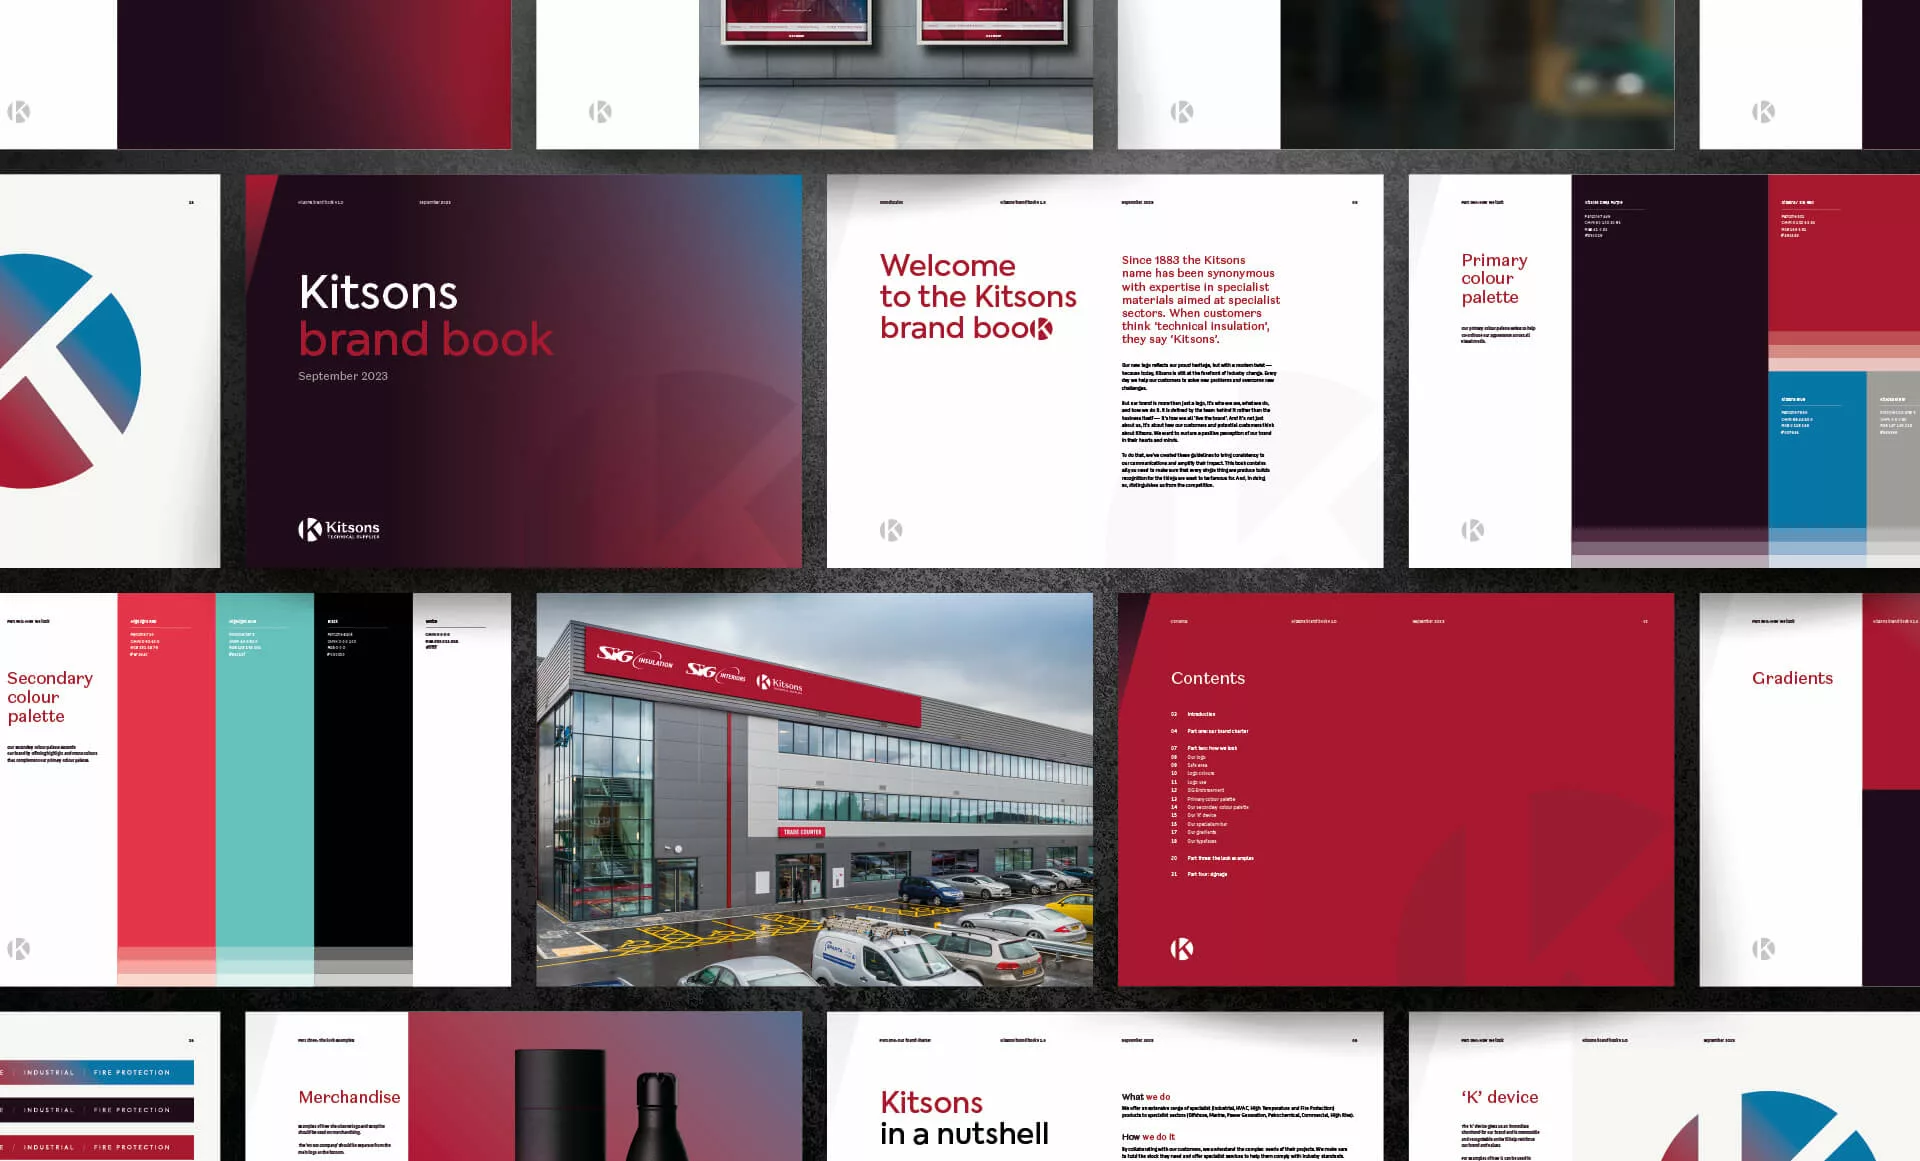 A variety of images showing the brand guidelines for Kitsons